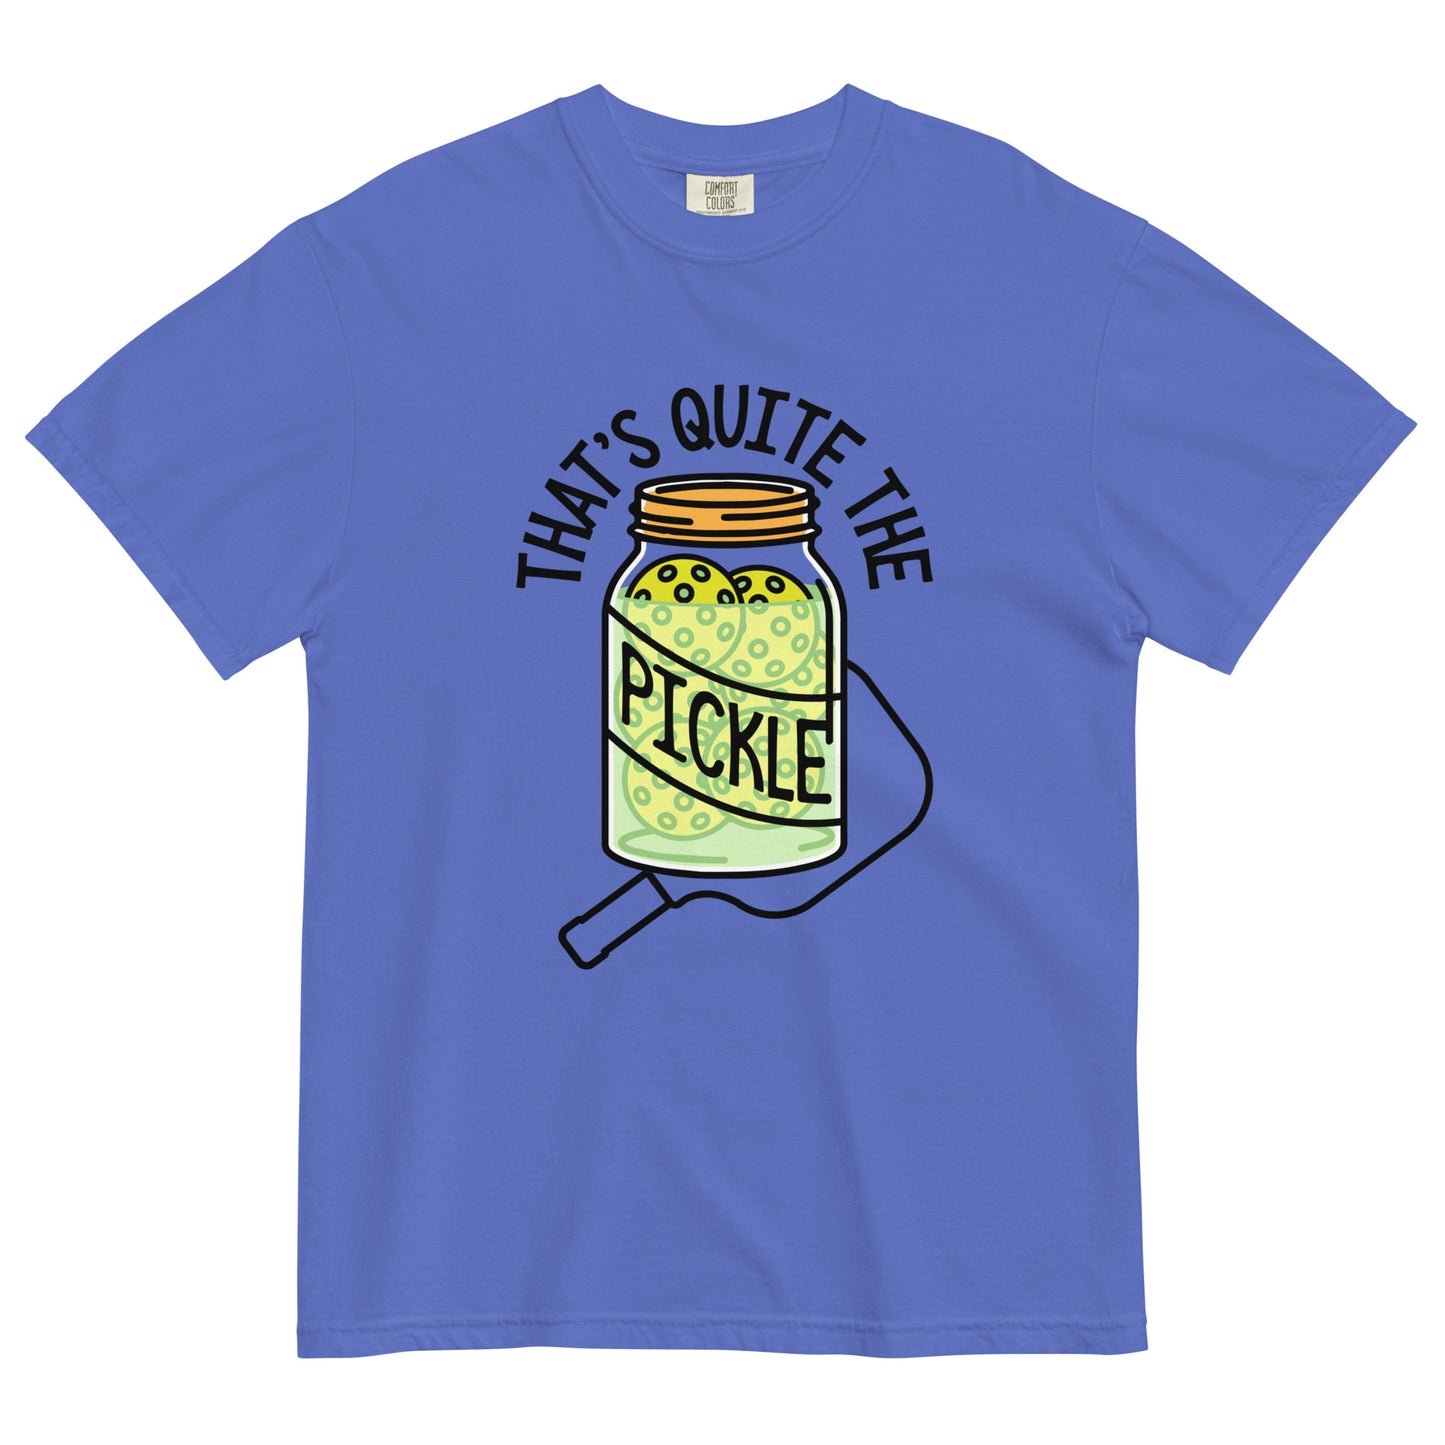 That's Quite The Pickle Men's Relaxed Fit Tee